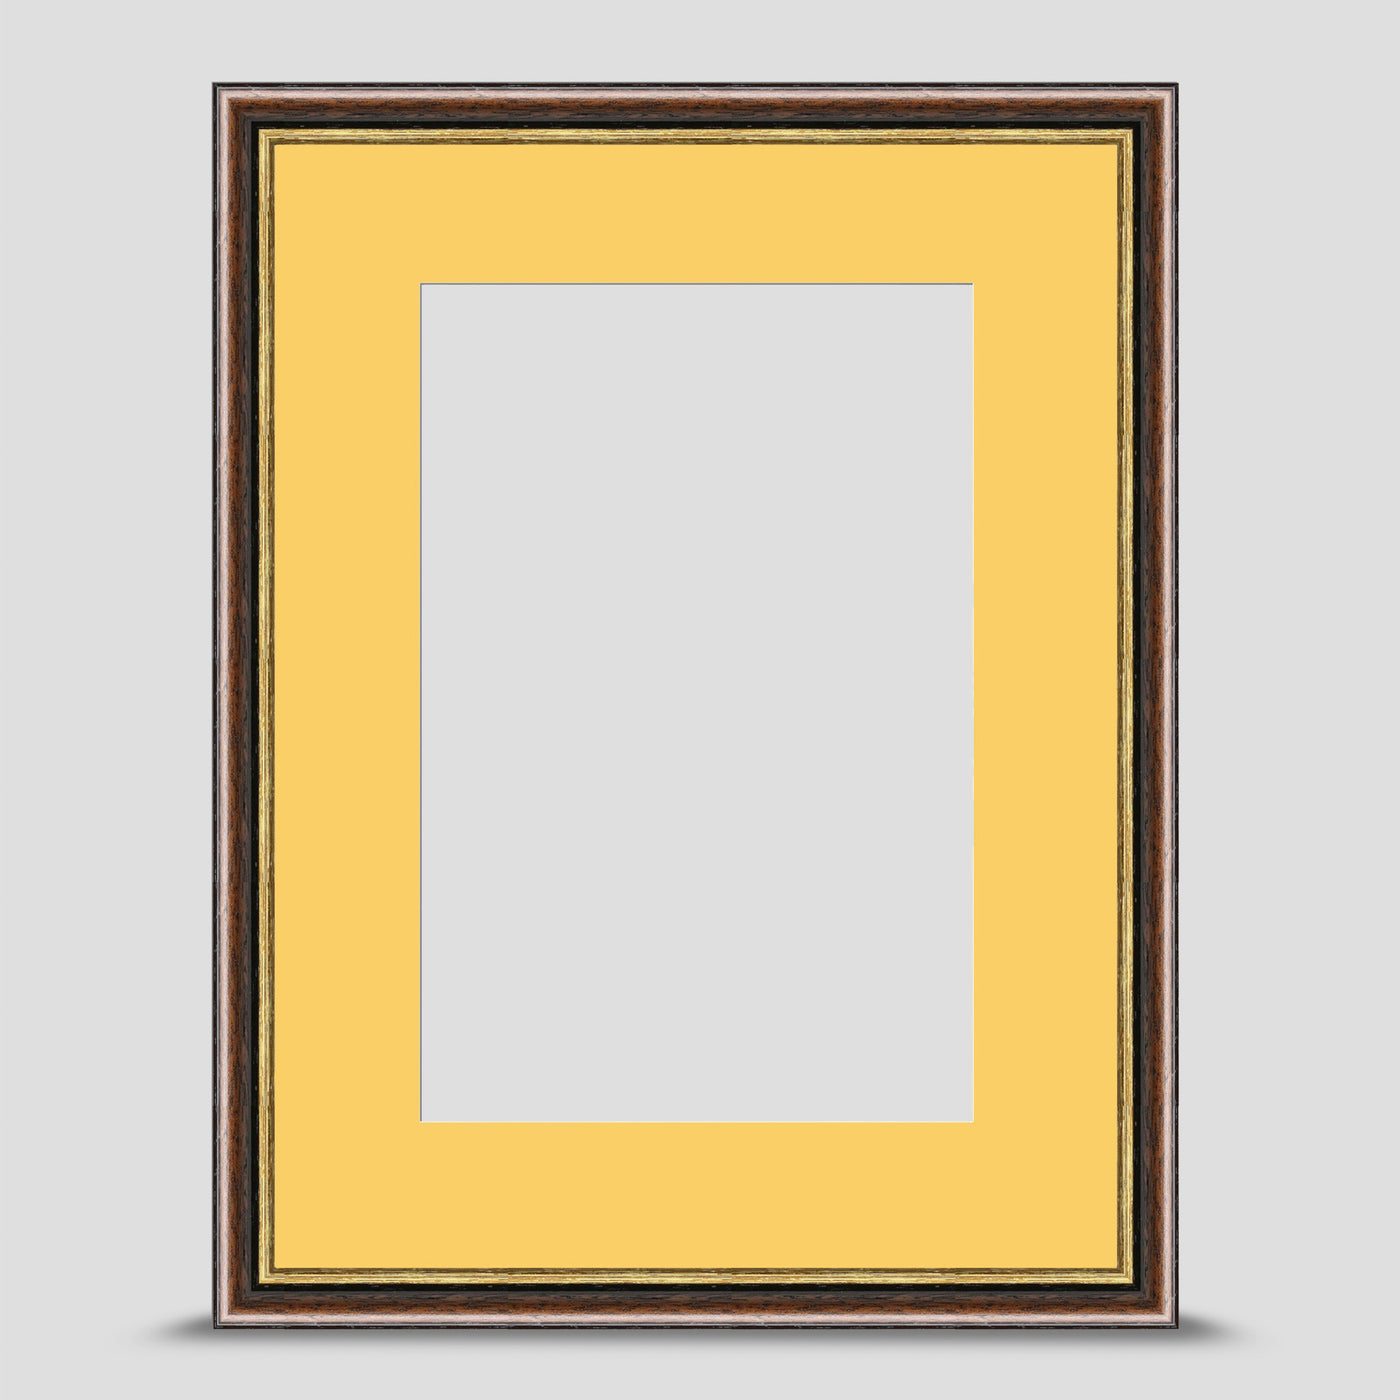 40x30cm Brown & Gold Picture Frame with a 30x20cm Mount